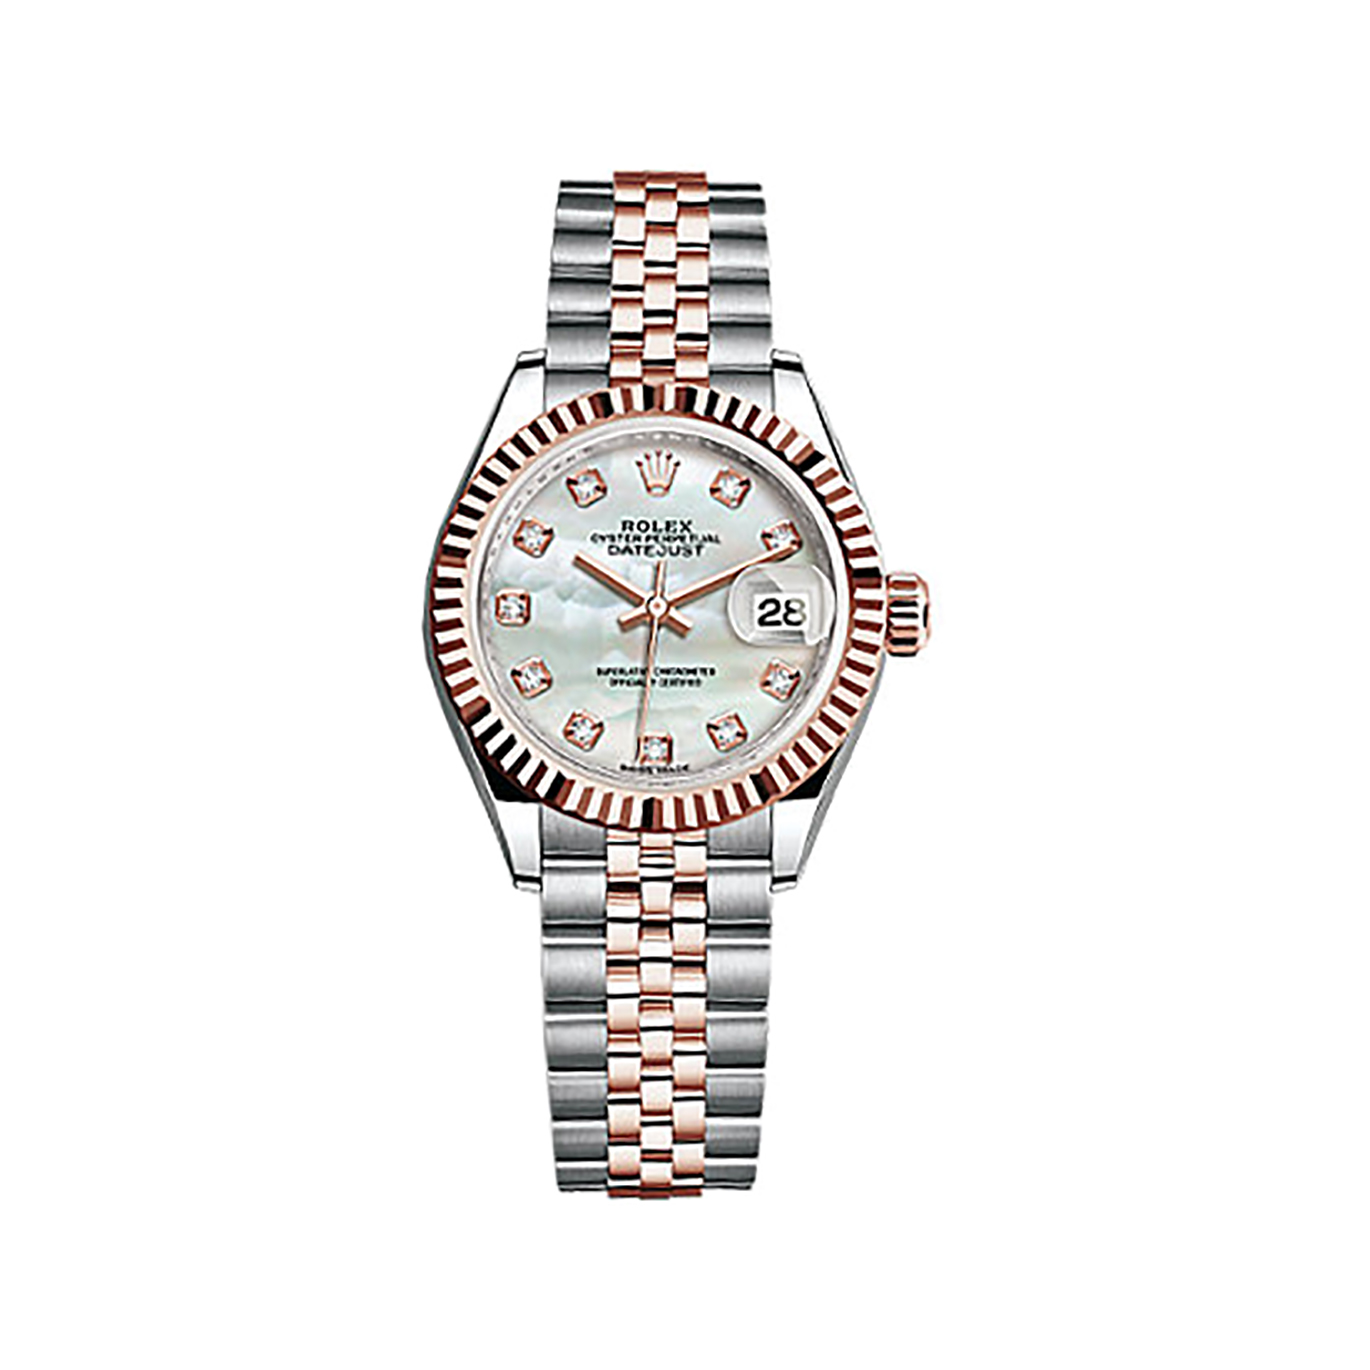 Lady-Datejust 28 279171 Rose Gold & Stainless Steel Watch (White Mother-of-pearl Set with Diamonds) - Click Image to Close